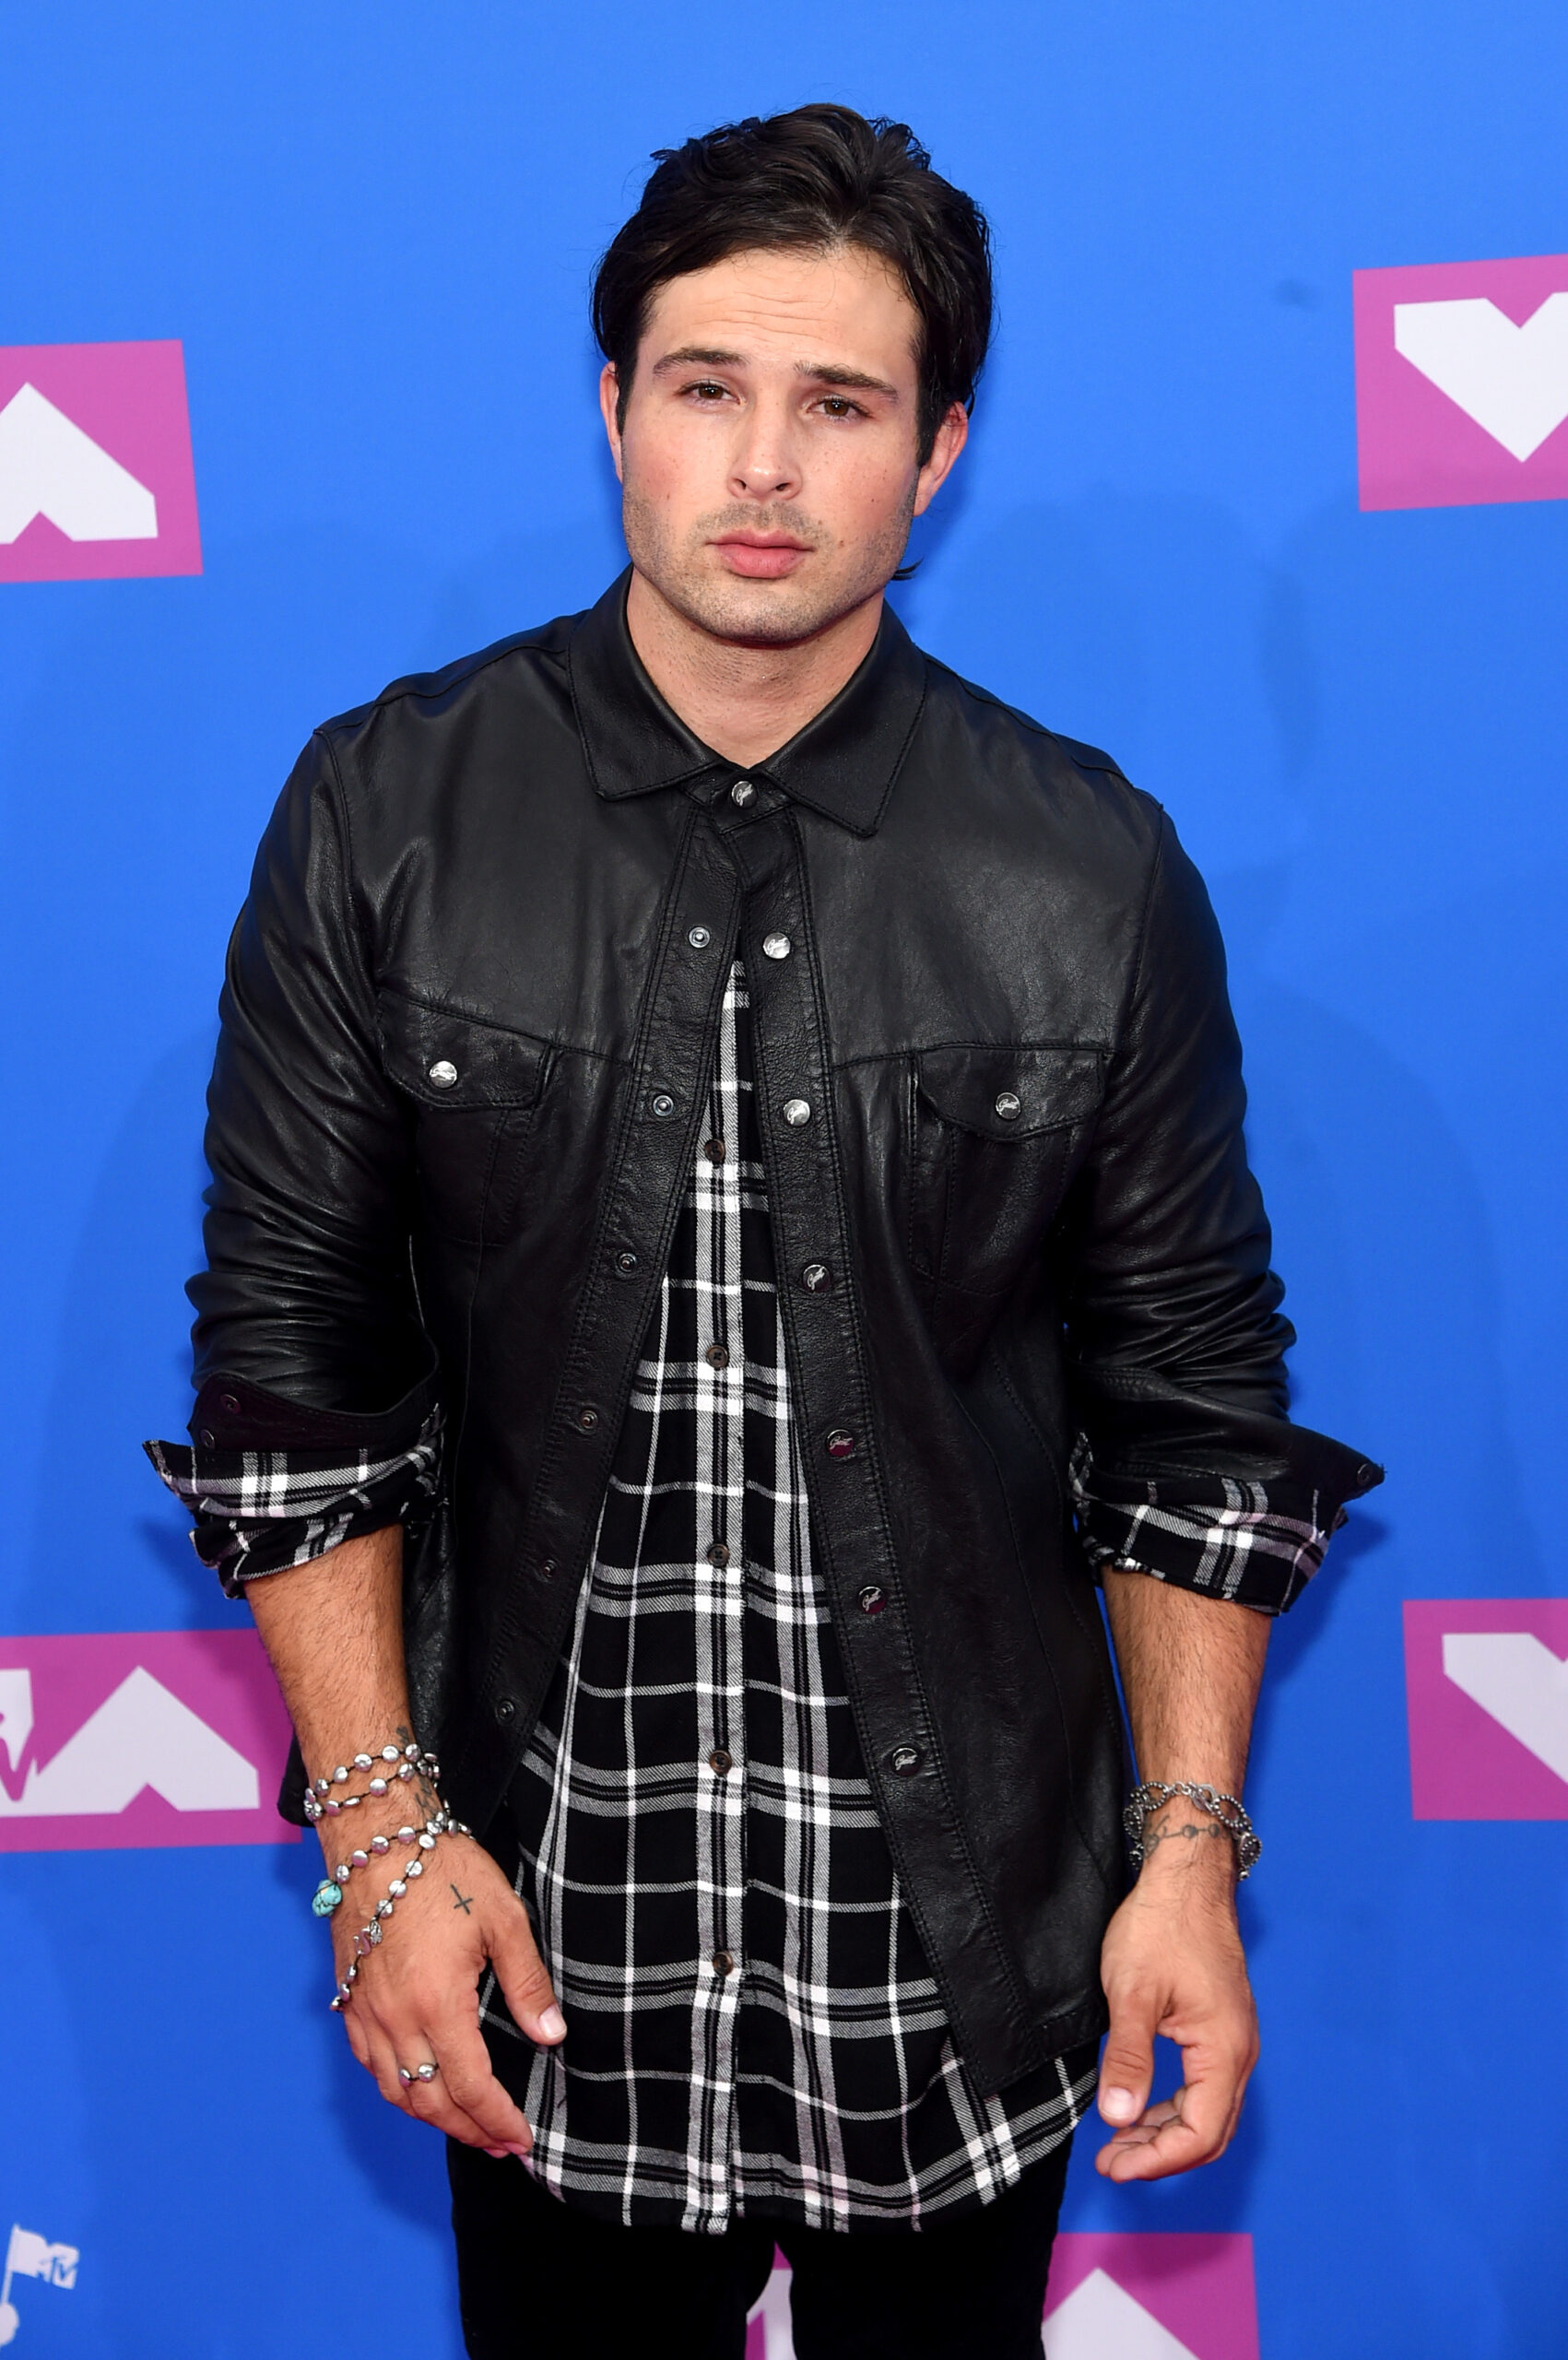 ‘days of our lives’ star cody longo’s cause of death revealed as alcohol abuse